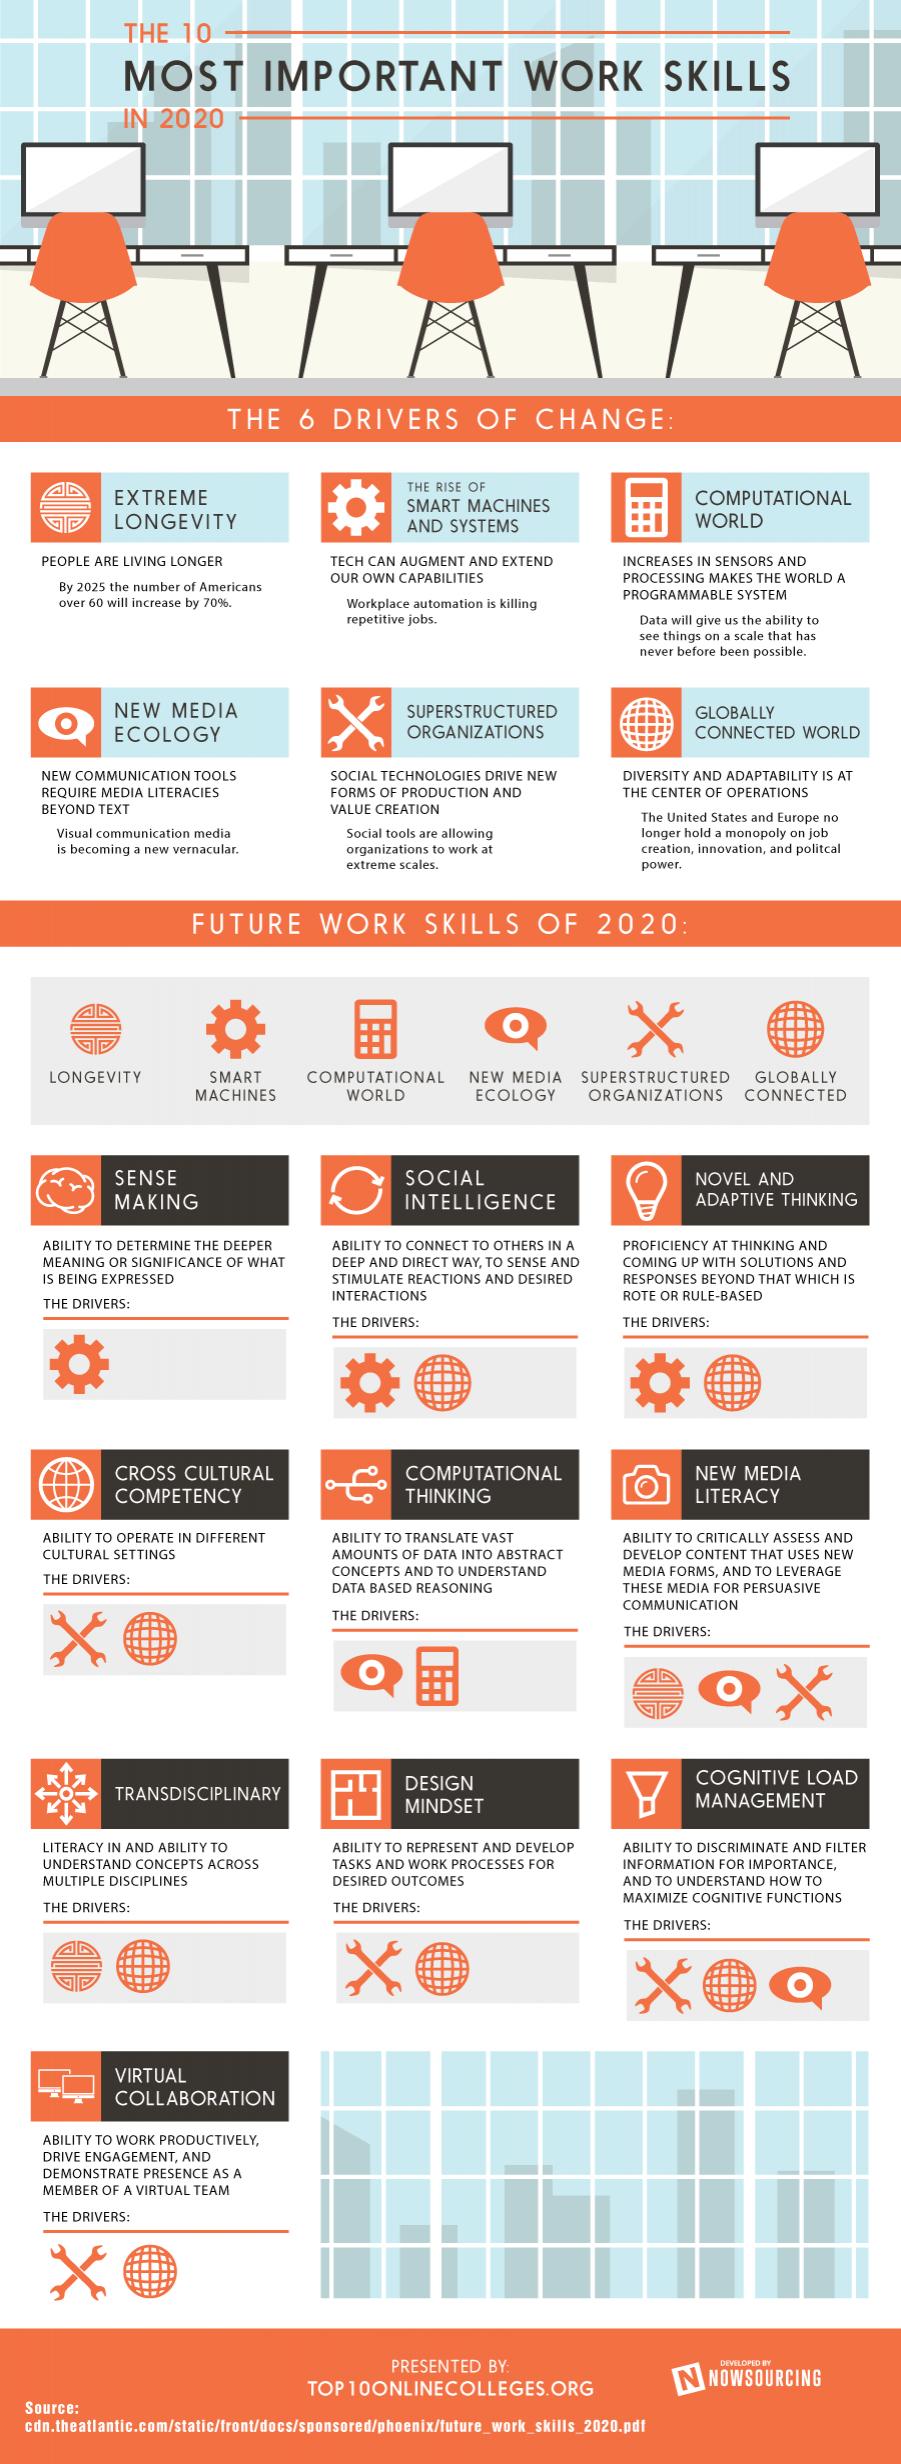 The 10 Most Important Work Skills